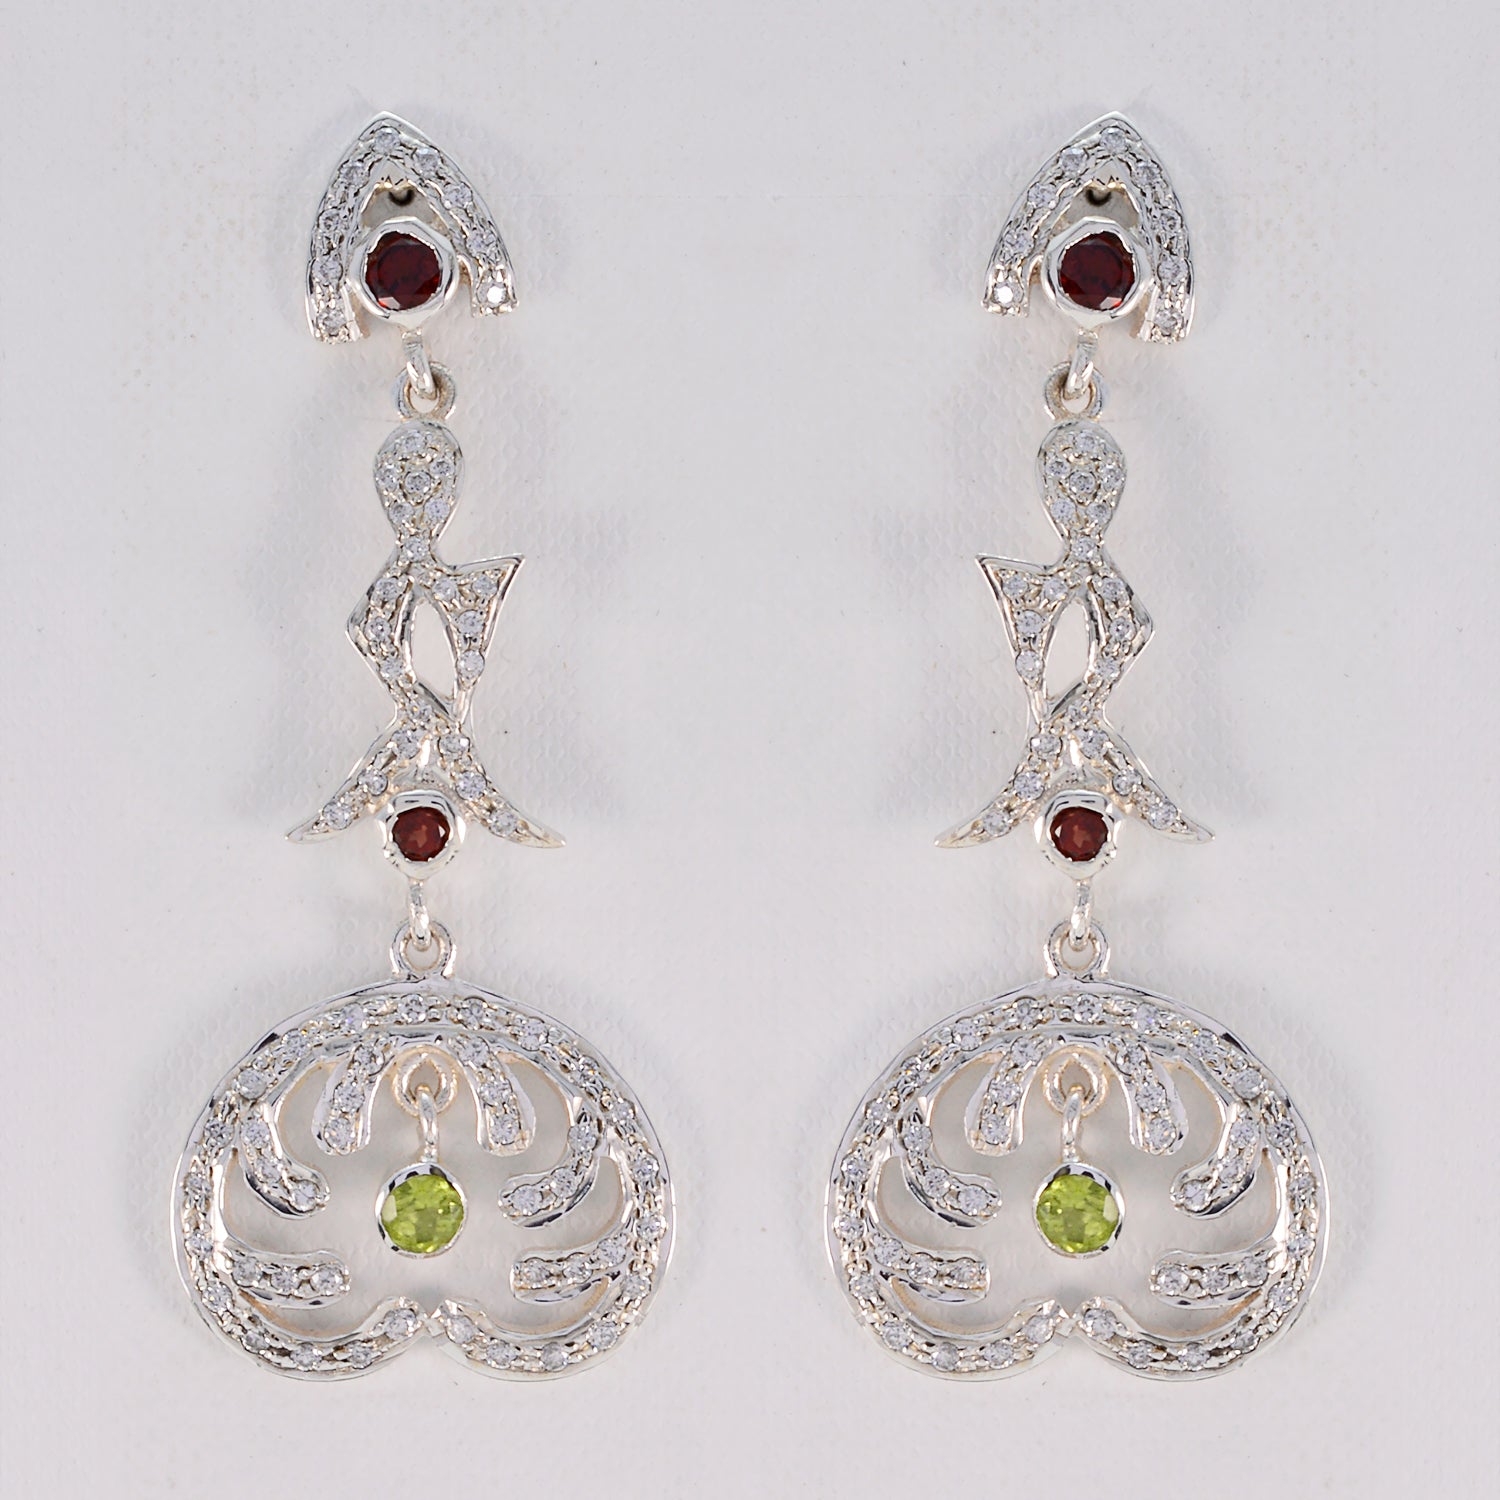 Riyo Genuine Gems round Faceted Multi Multi Stone Silver Earring gift for cyber Monday